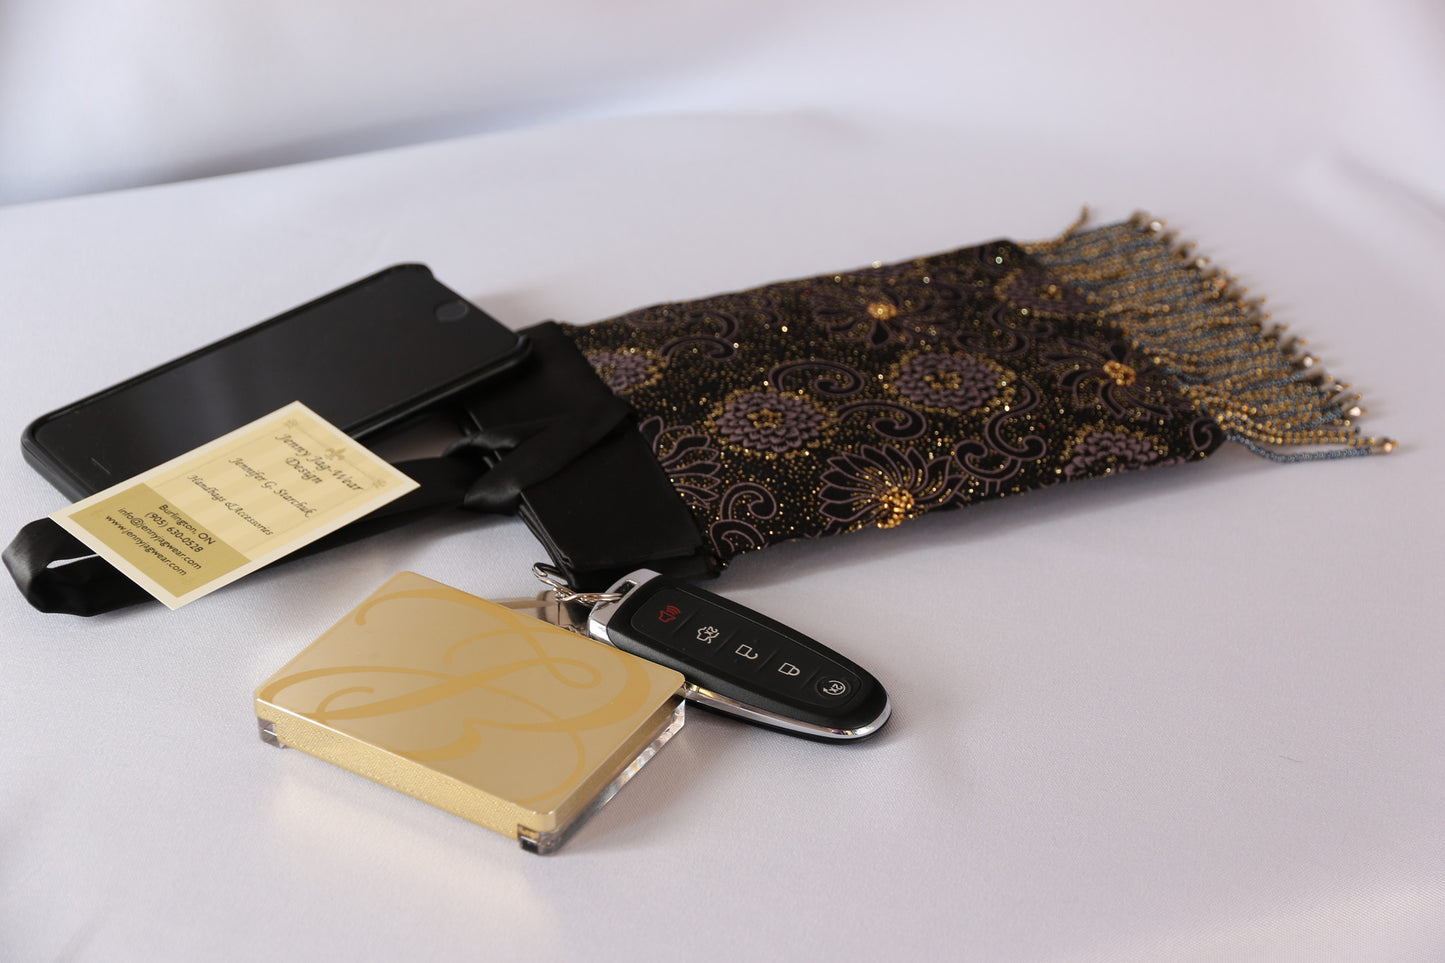 Black and Gold Evening Bag from Jenny Jag-Wear Design. Photo demonstrates this compact and functional purse can easily hold a compact, car keys, lipstick tube and cell phone without compromise. The Zara Collection from Jenny Jag-Wear Design.